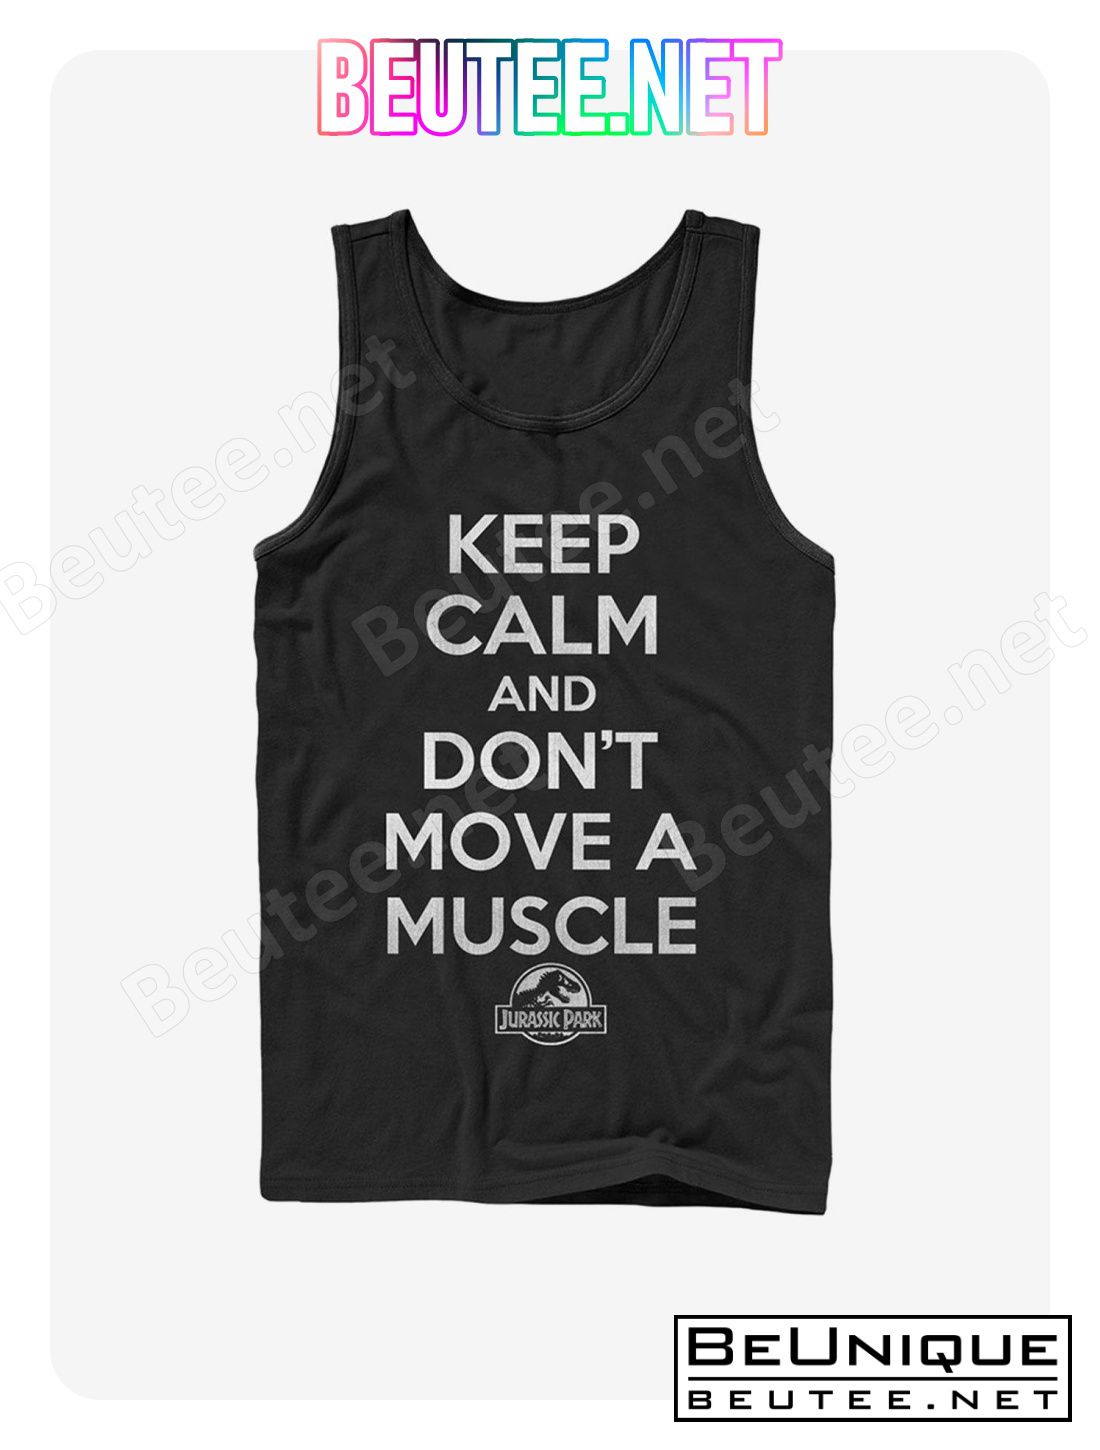 Keep Calm and Don't Move a Muscle Tank